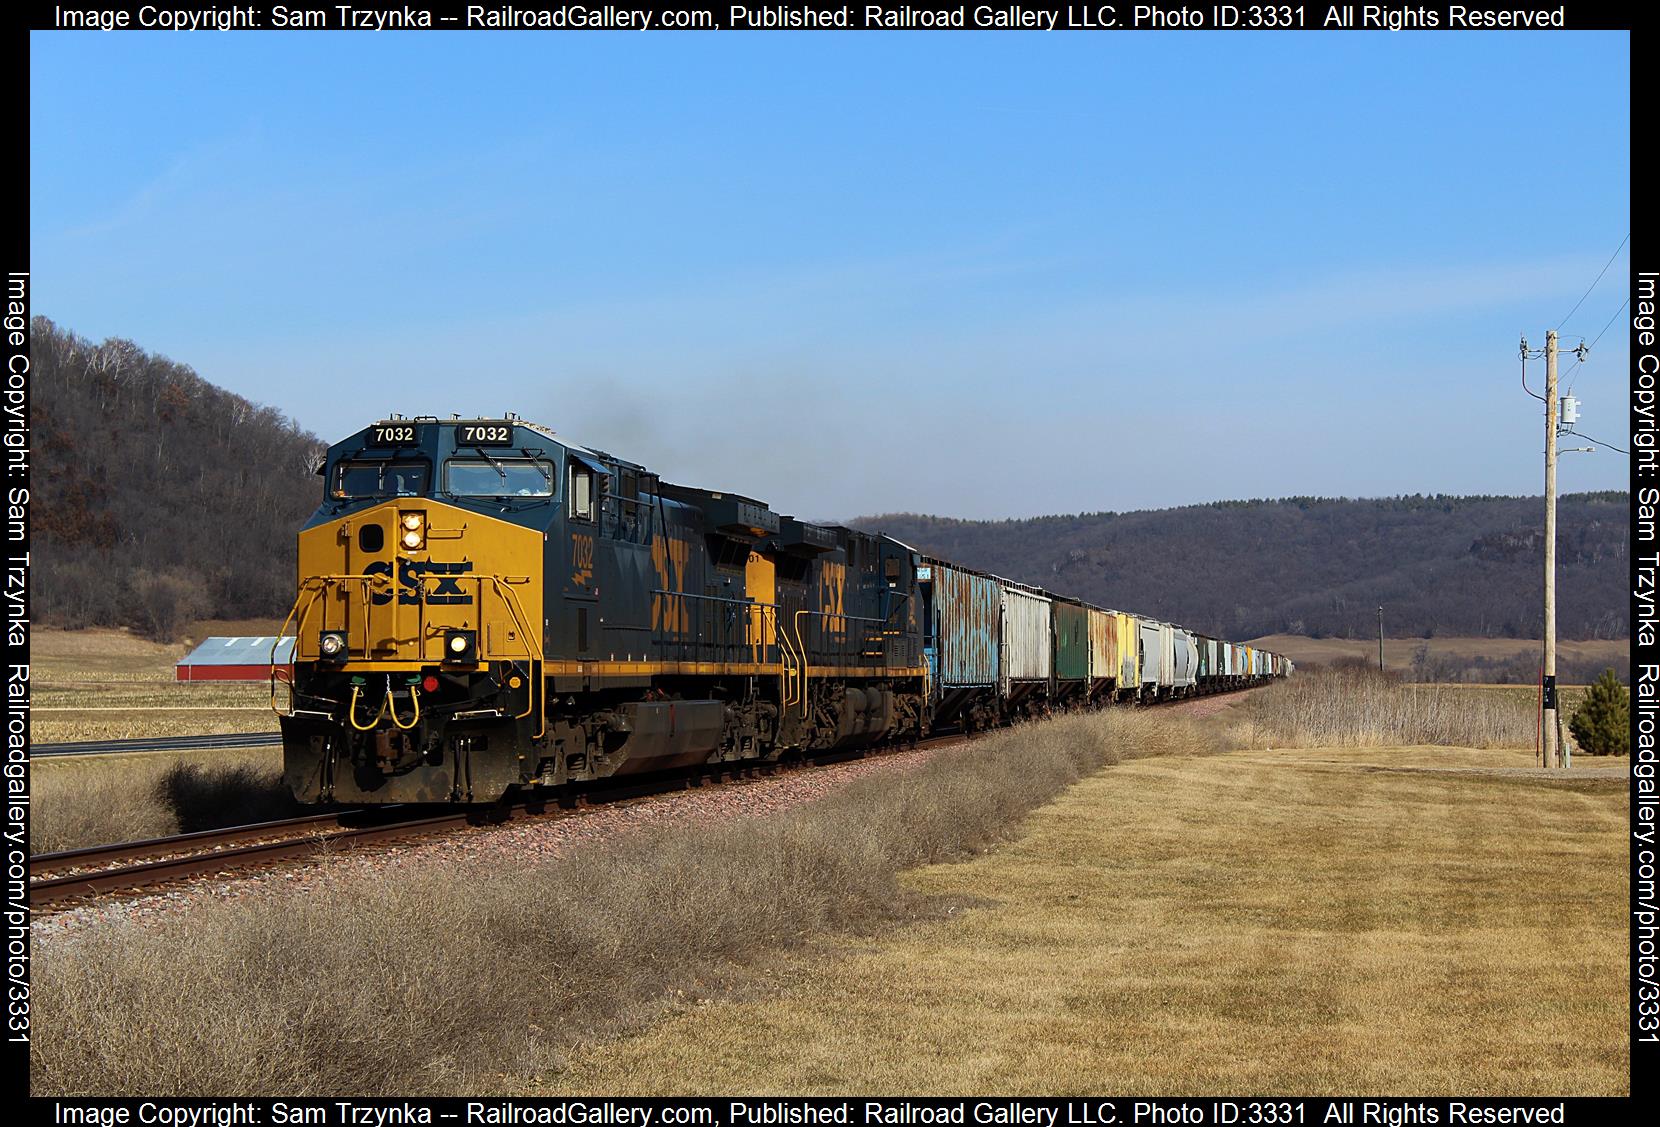 CSXT 7032 is a class GE CM44AC and  is pictured in Stockton, Minnesota, USA.  This was taken along the CPKC Waseca Subdivision on the CPKC Railway. Photo Copyright: Sam Trzynka uploaded to Railroad Gallery on 04/28/2024. This photograph of CSXT 7032 was taken on Saturday, March 02, 2024. All Rights Reserved. 